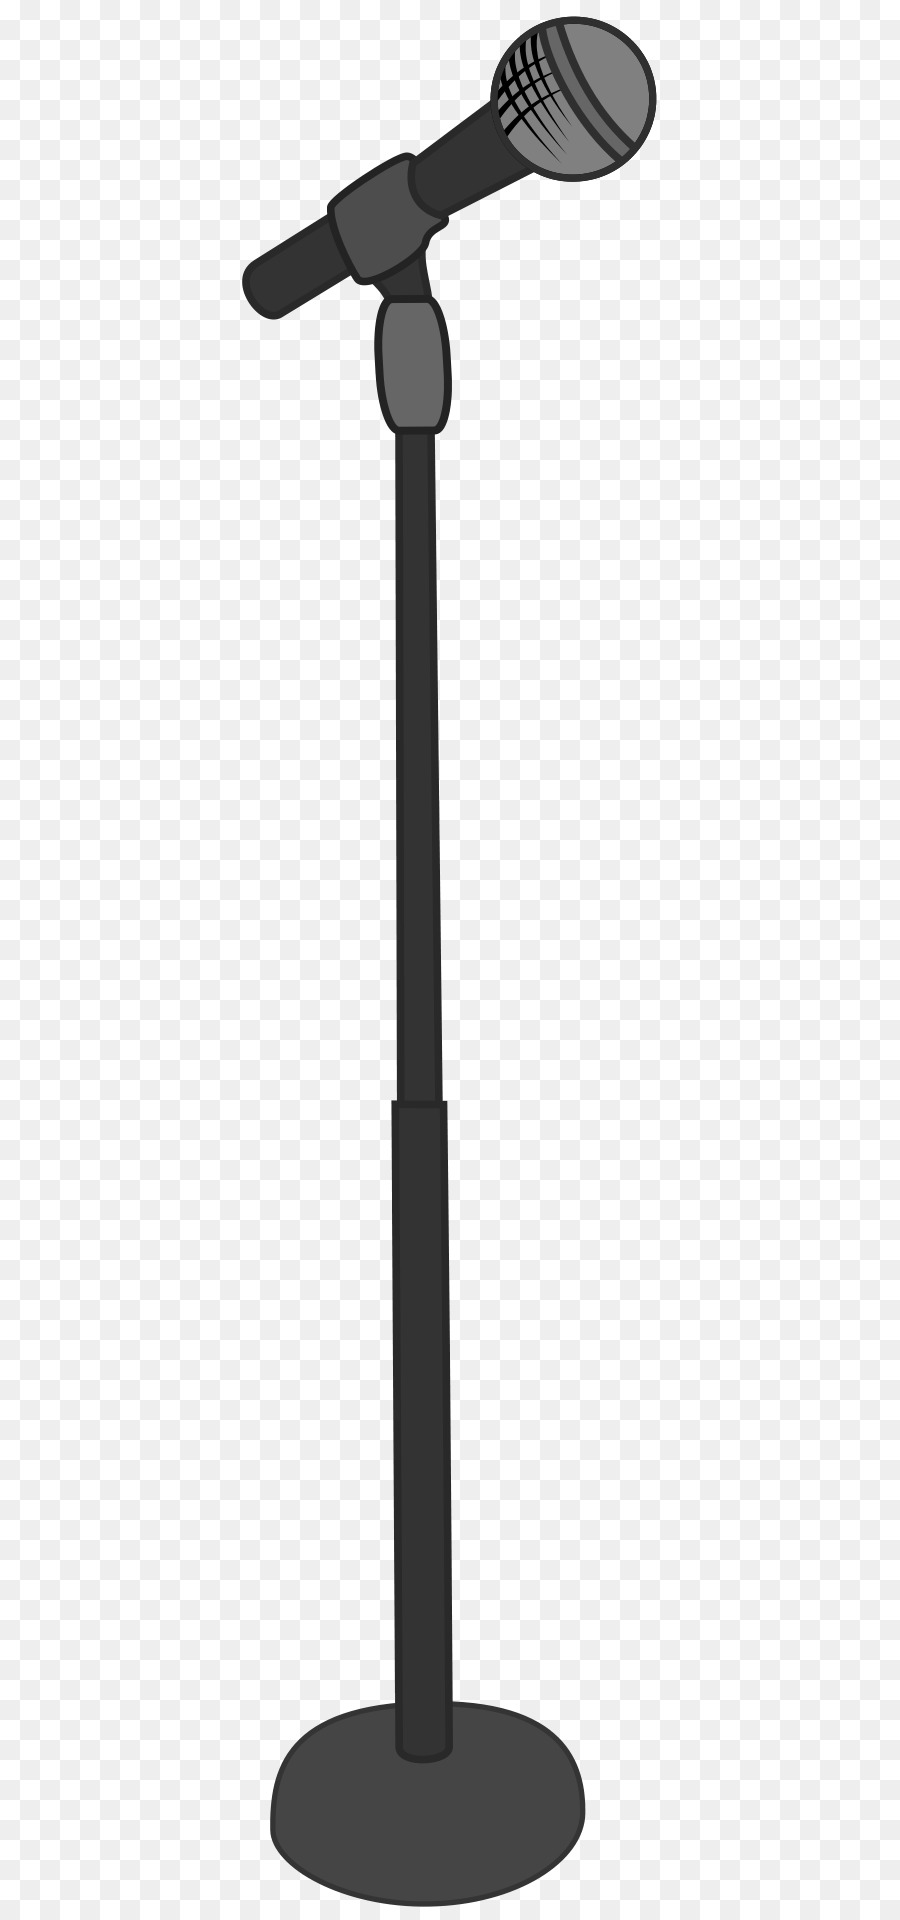 Microphone stand Drawing Clip art - Cartoon Microphone png download - 480*1918 - Free Transparent Microphone png Download.